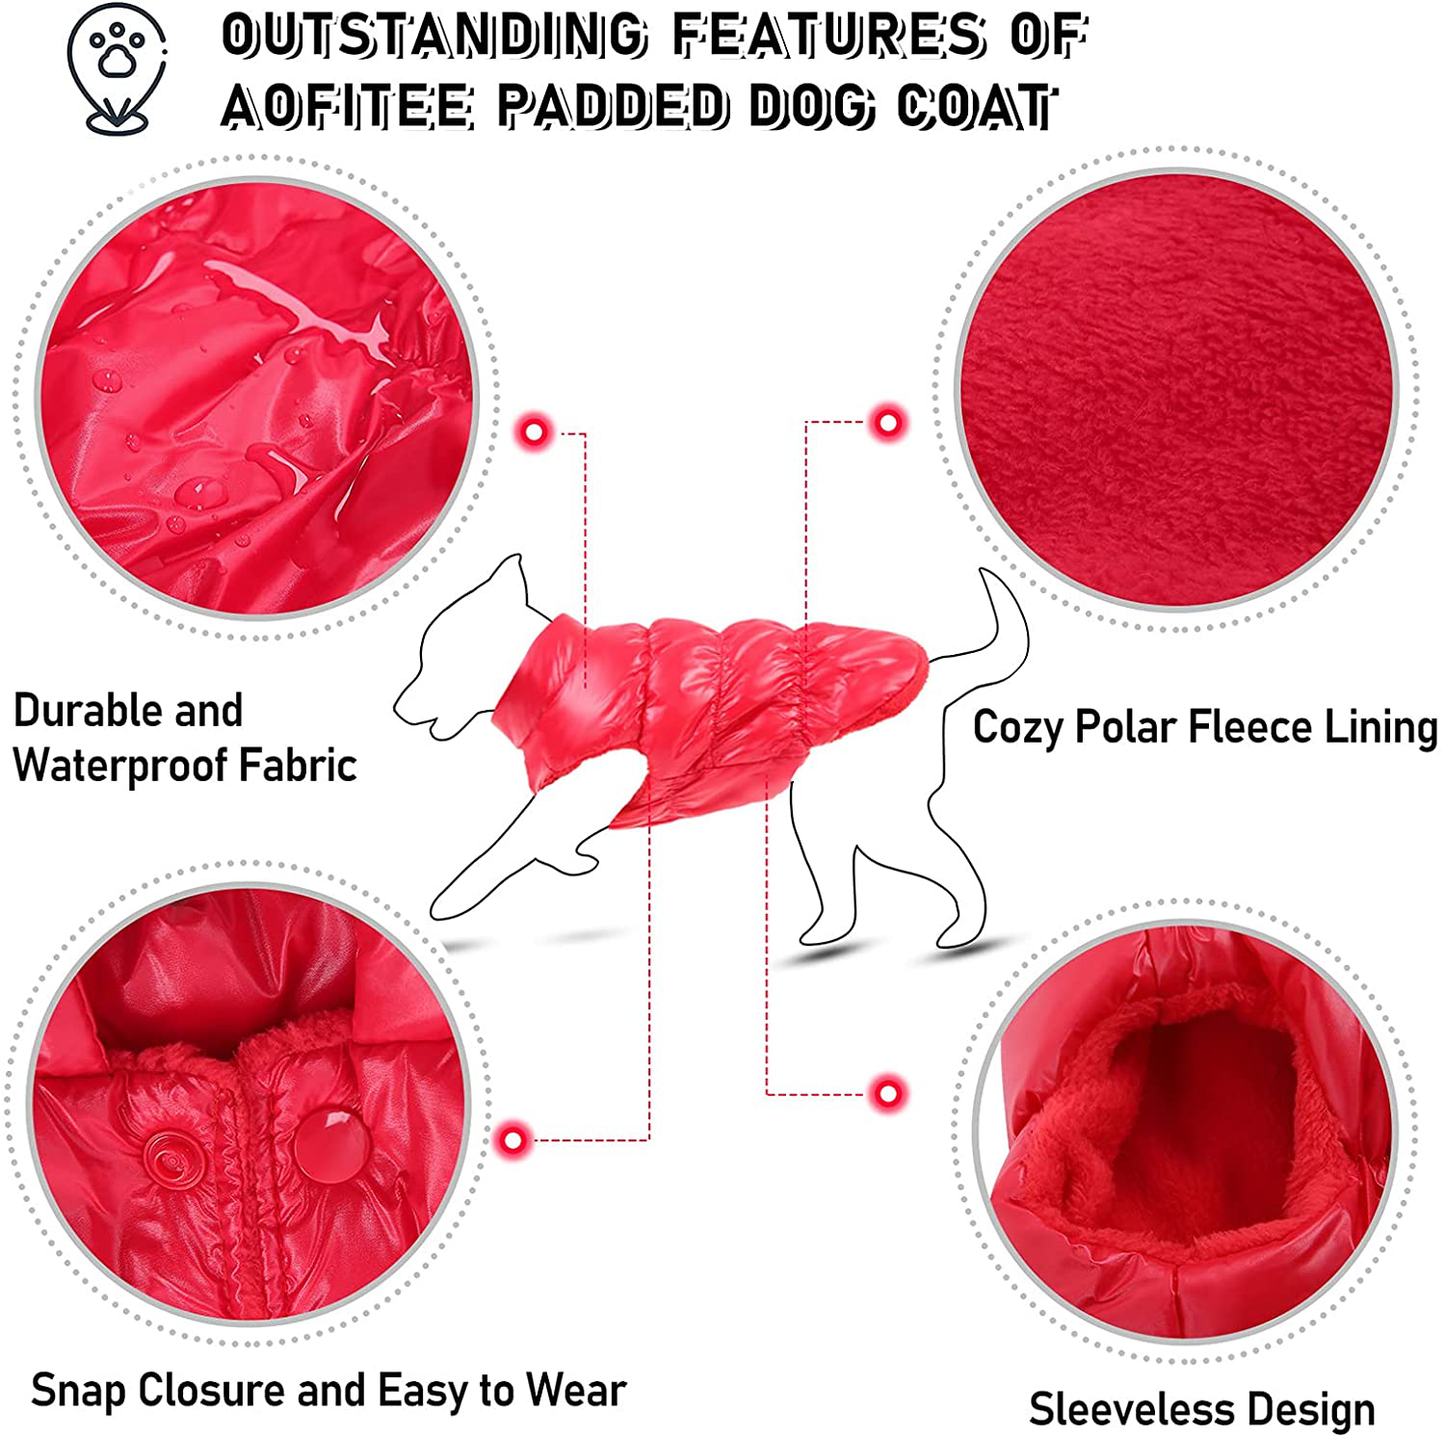 AOFITEE Winter Dog Coat Waterproof Windproof Fleece Puppy Vest, Warm Padded Dogs down Jacket, Lightweight Outdoor Pet Snowsuit Apparel Cold Weather Clothes for Small and Medium Dogs